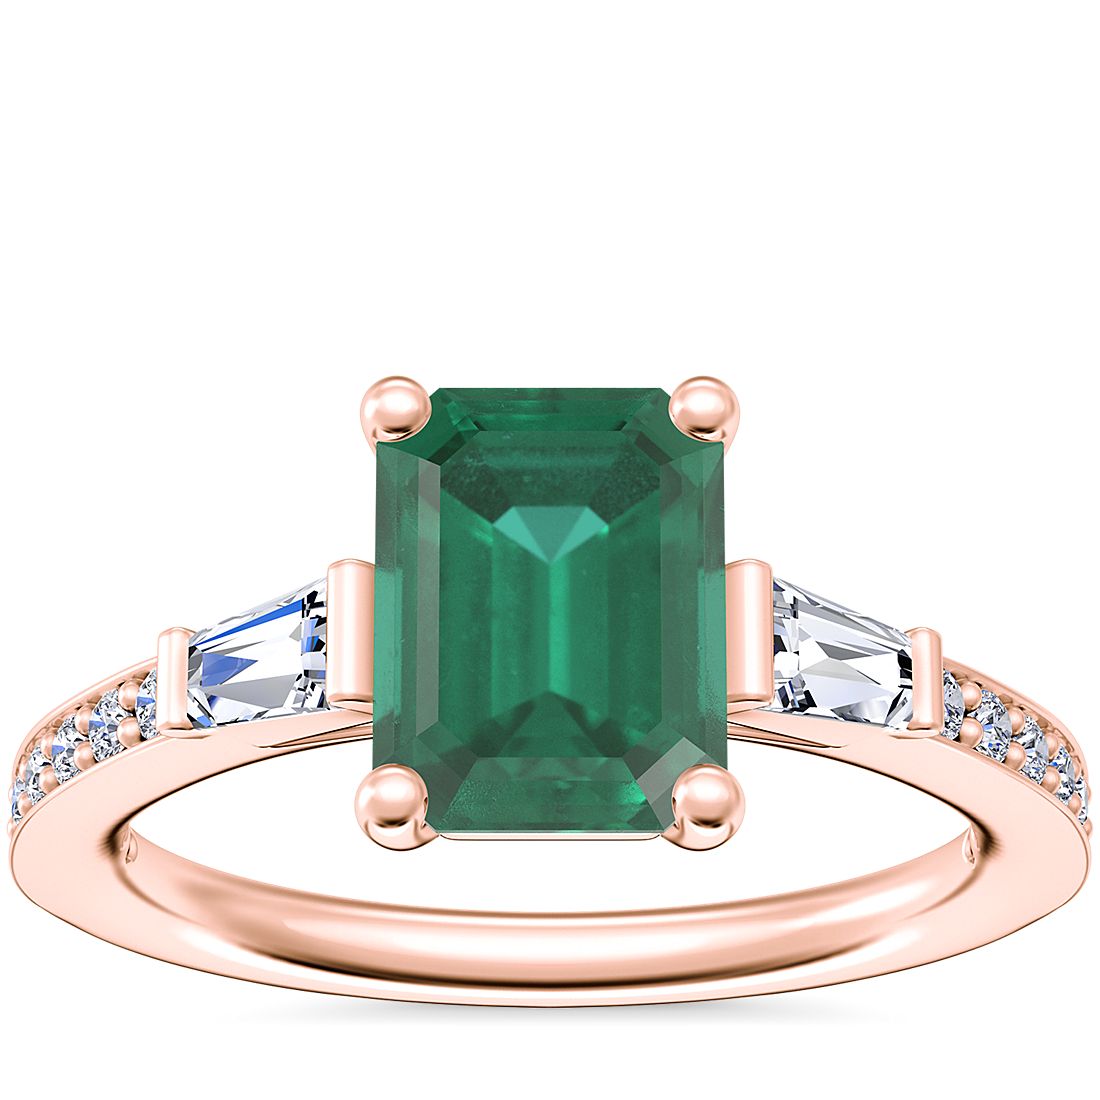 Tapered Baguette Diamond Cathedral Engagement Ring with Emerald-Cut Emerald in 14k Rose Gold (8x6mm)